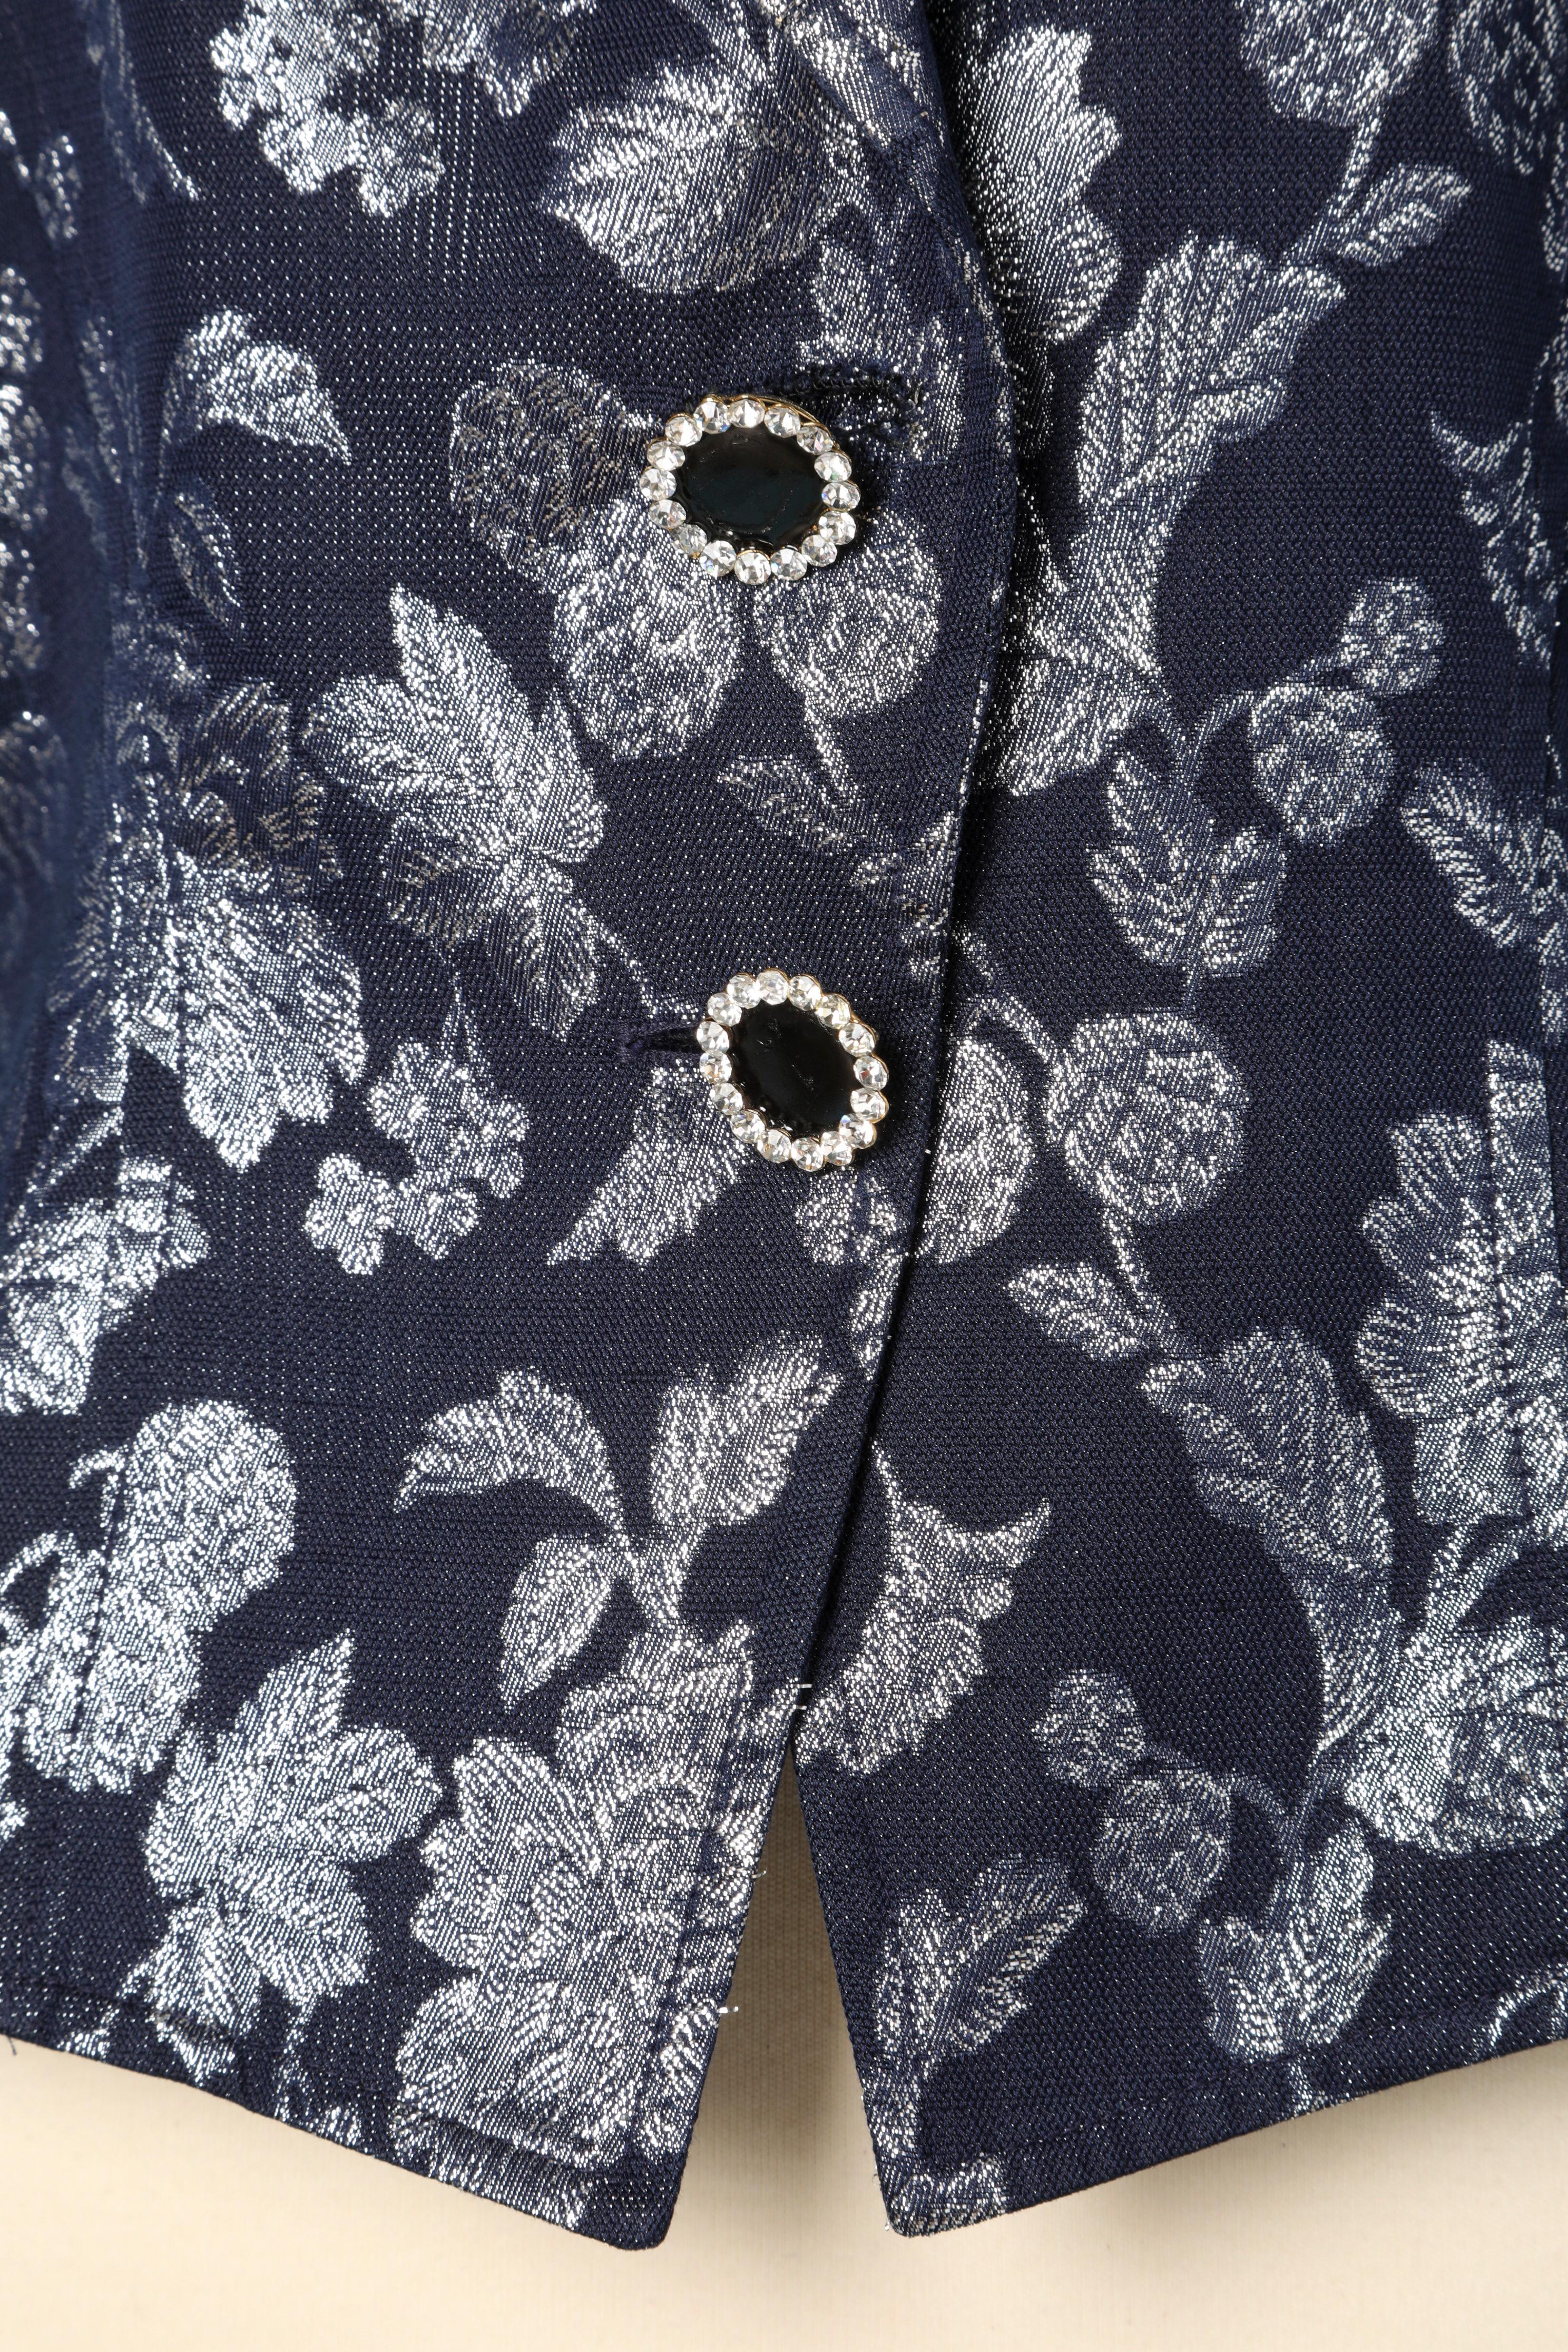 Black Blue and silver damask jacket with rhinestone buttons Ungaro  For Sale